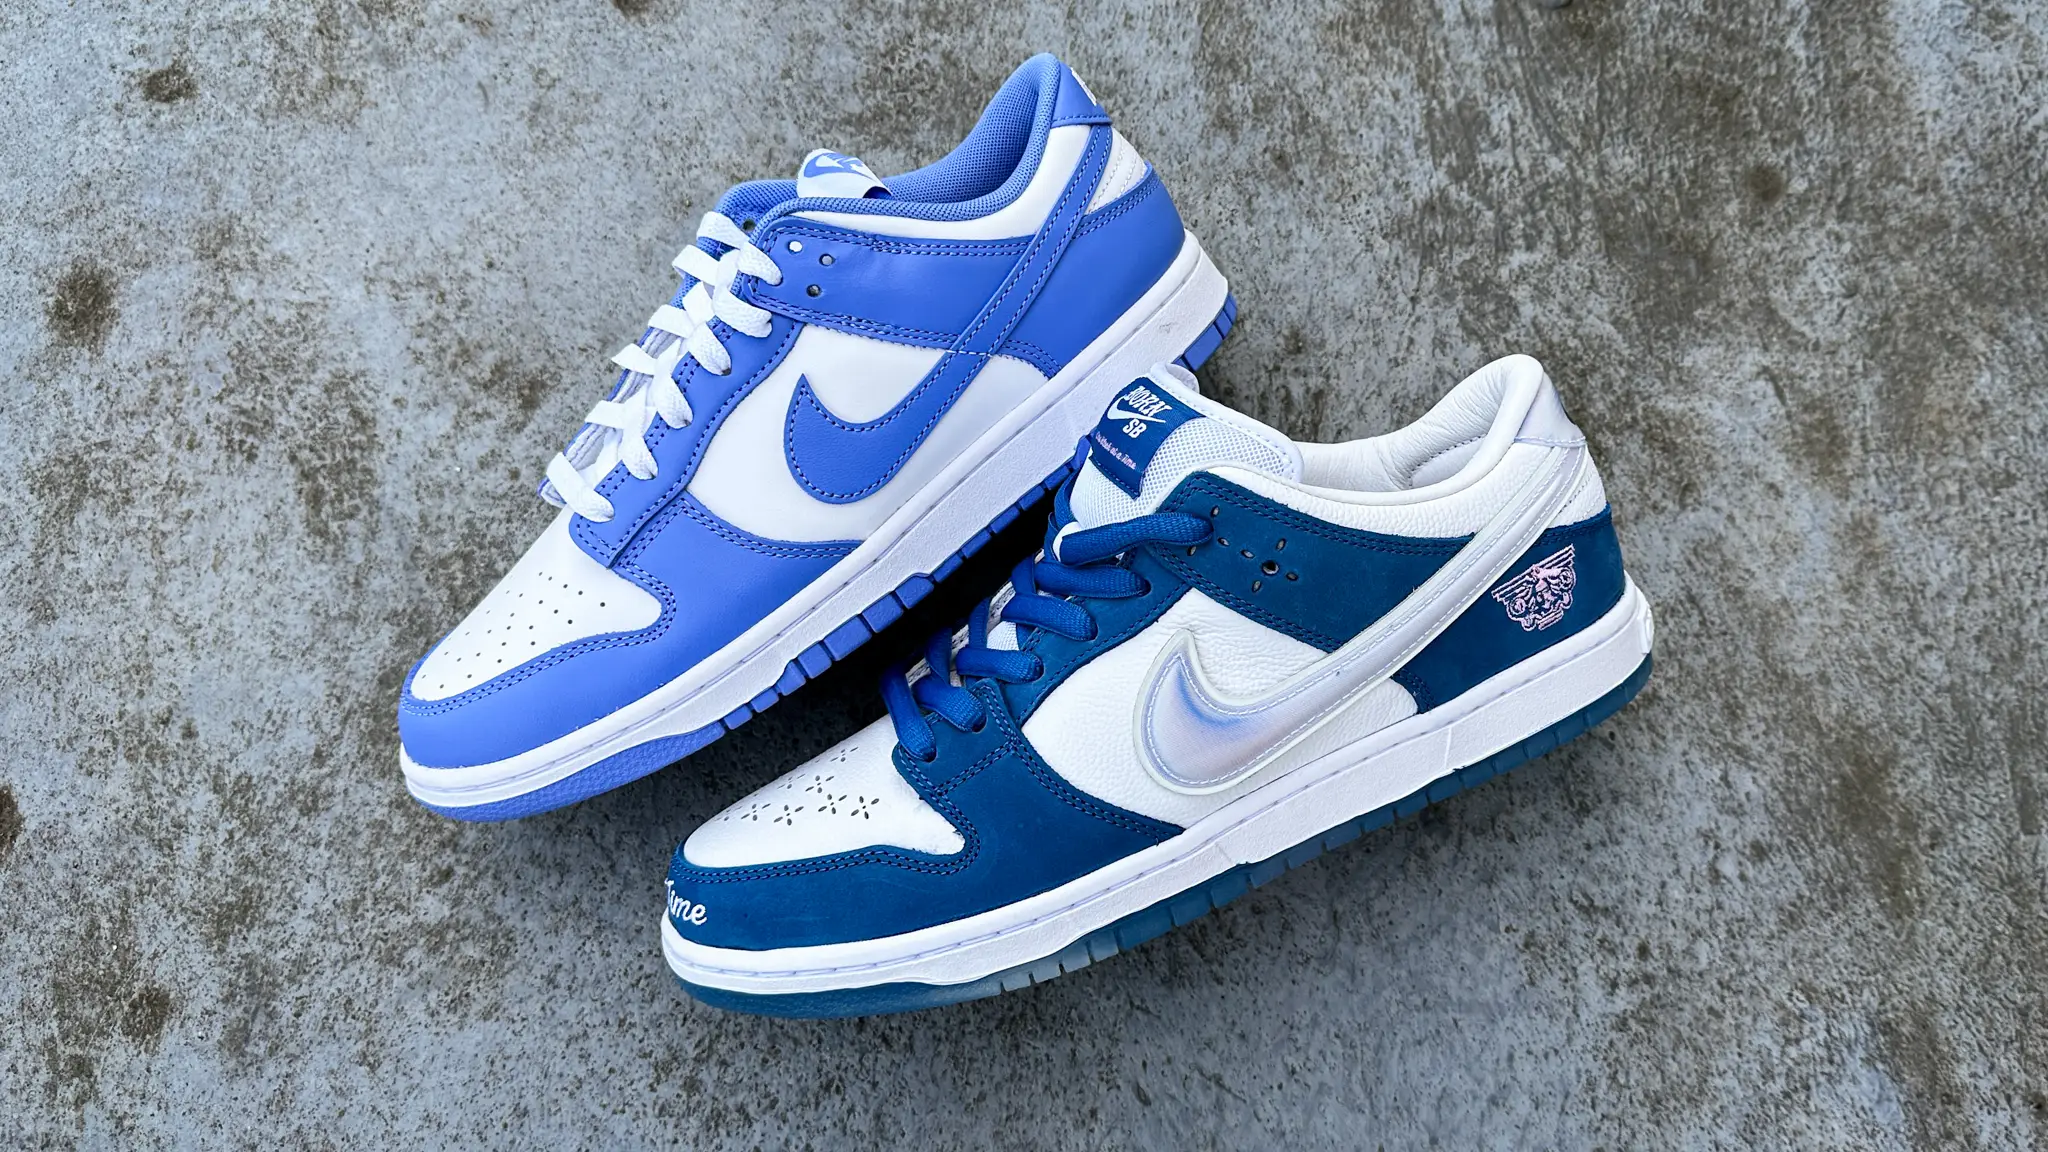 Nike Dunk Low vs. Nike SB Dunk Low: What's the Difference? | The